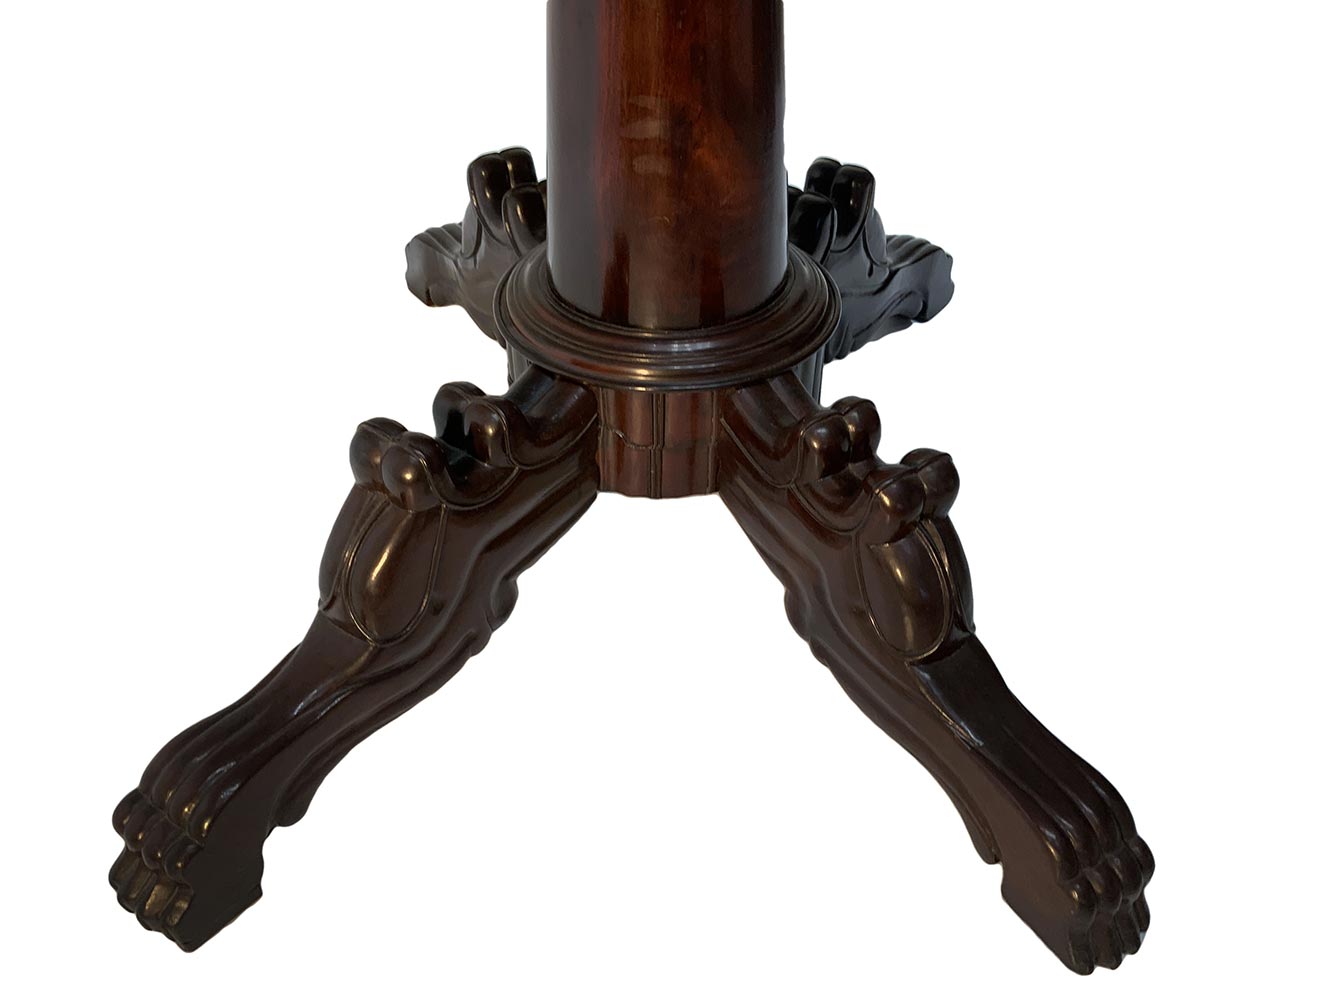 Extending oval dining table in rosewood. Four-spoke foot with lion carving, late 19th century. H cm - Image 2 of 4